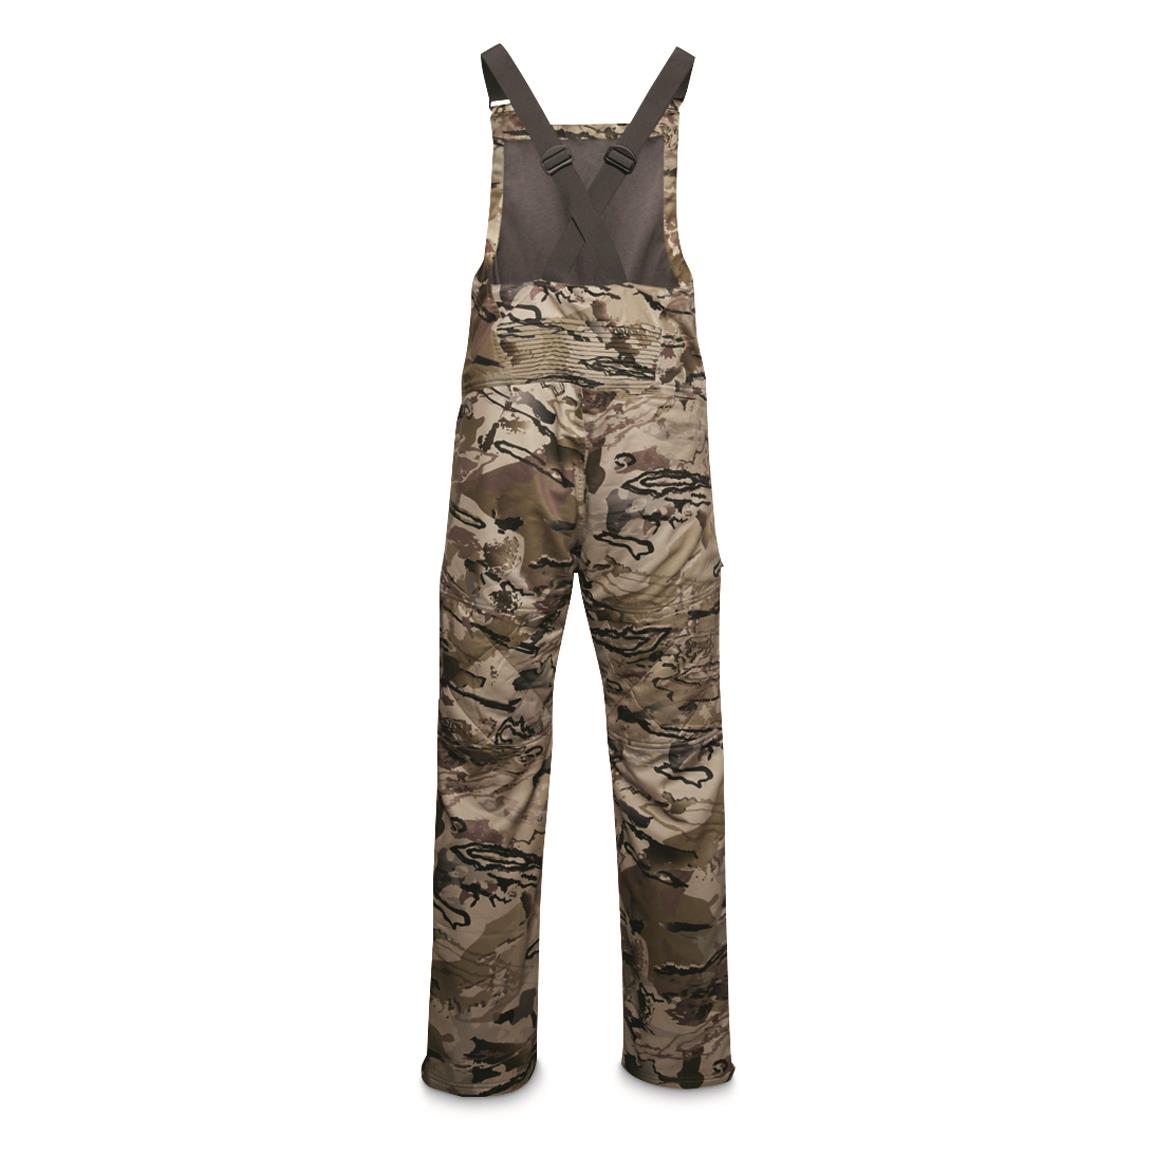 Under Armour Men's Brow Tine Hunting 